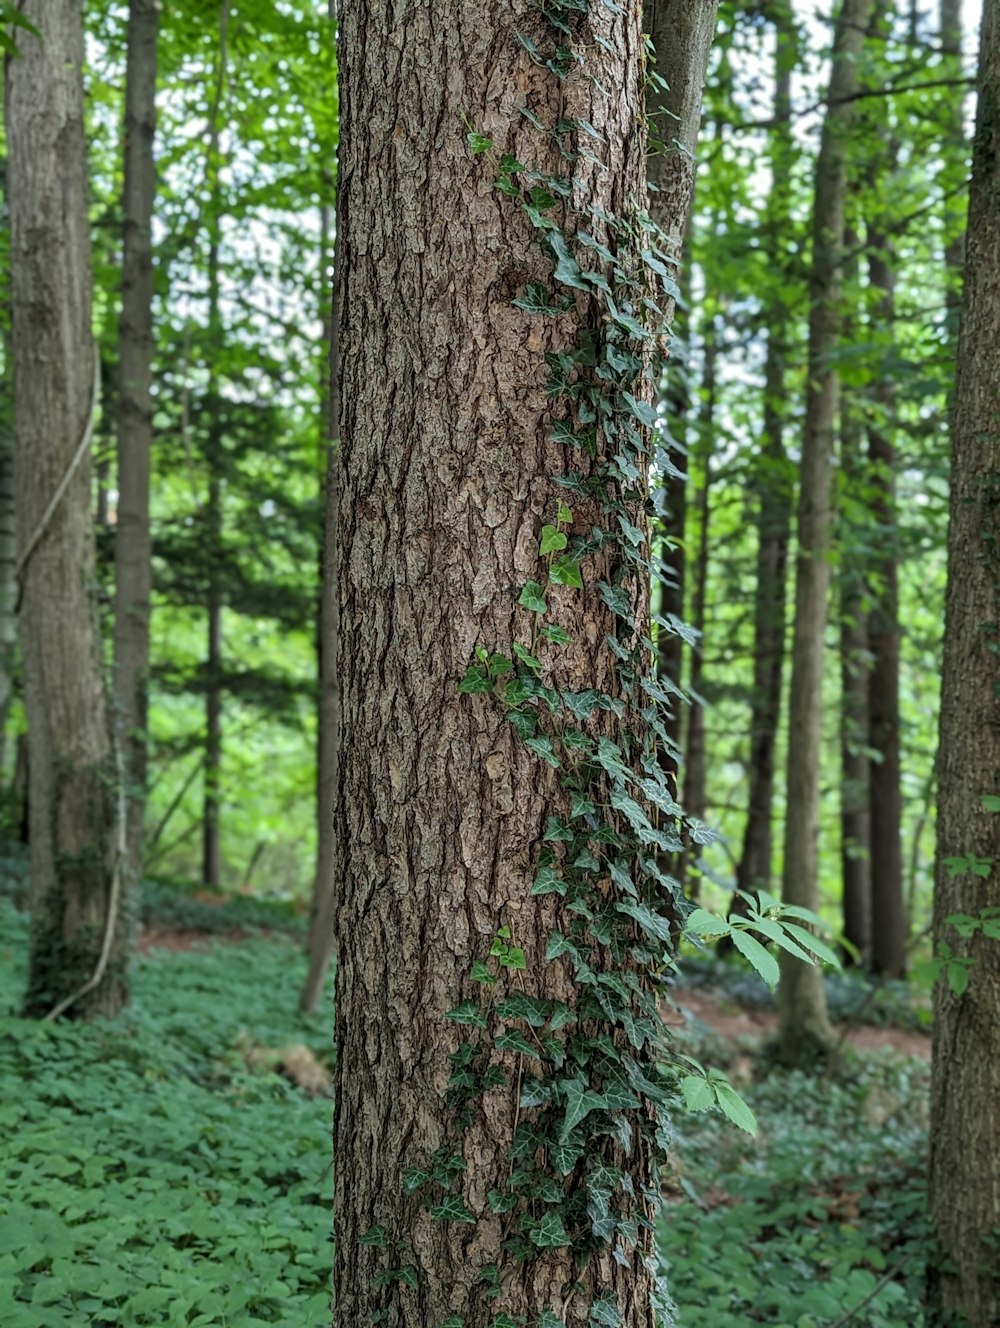 a tree with vines growing on it in a forest